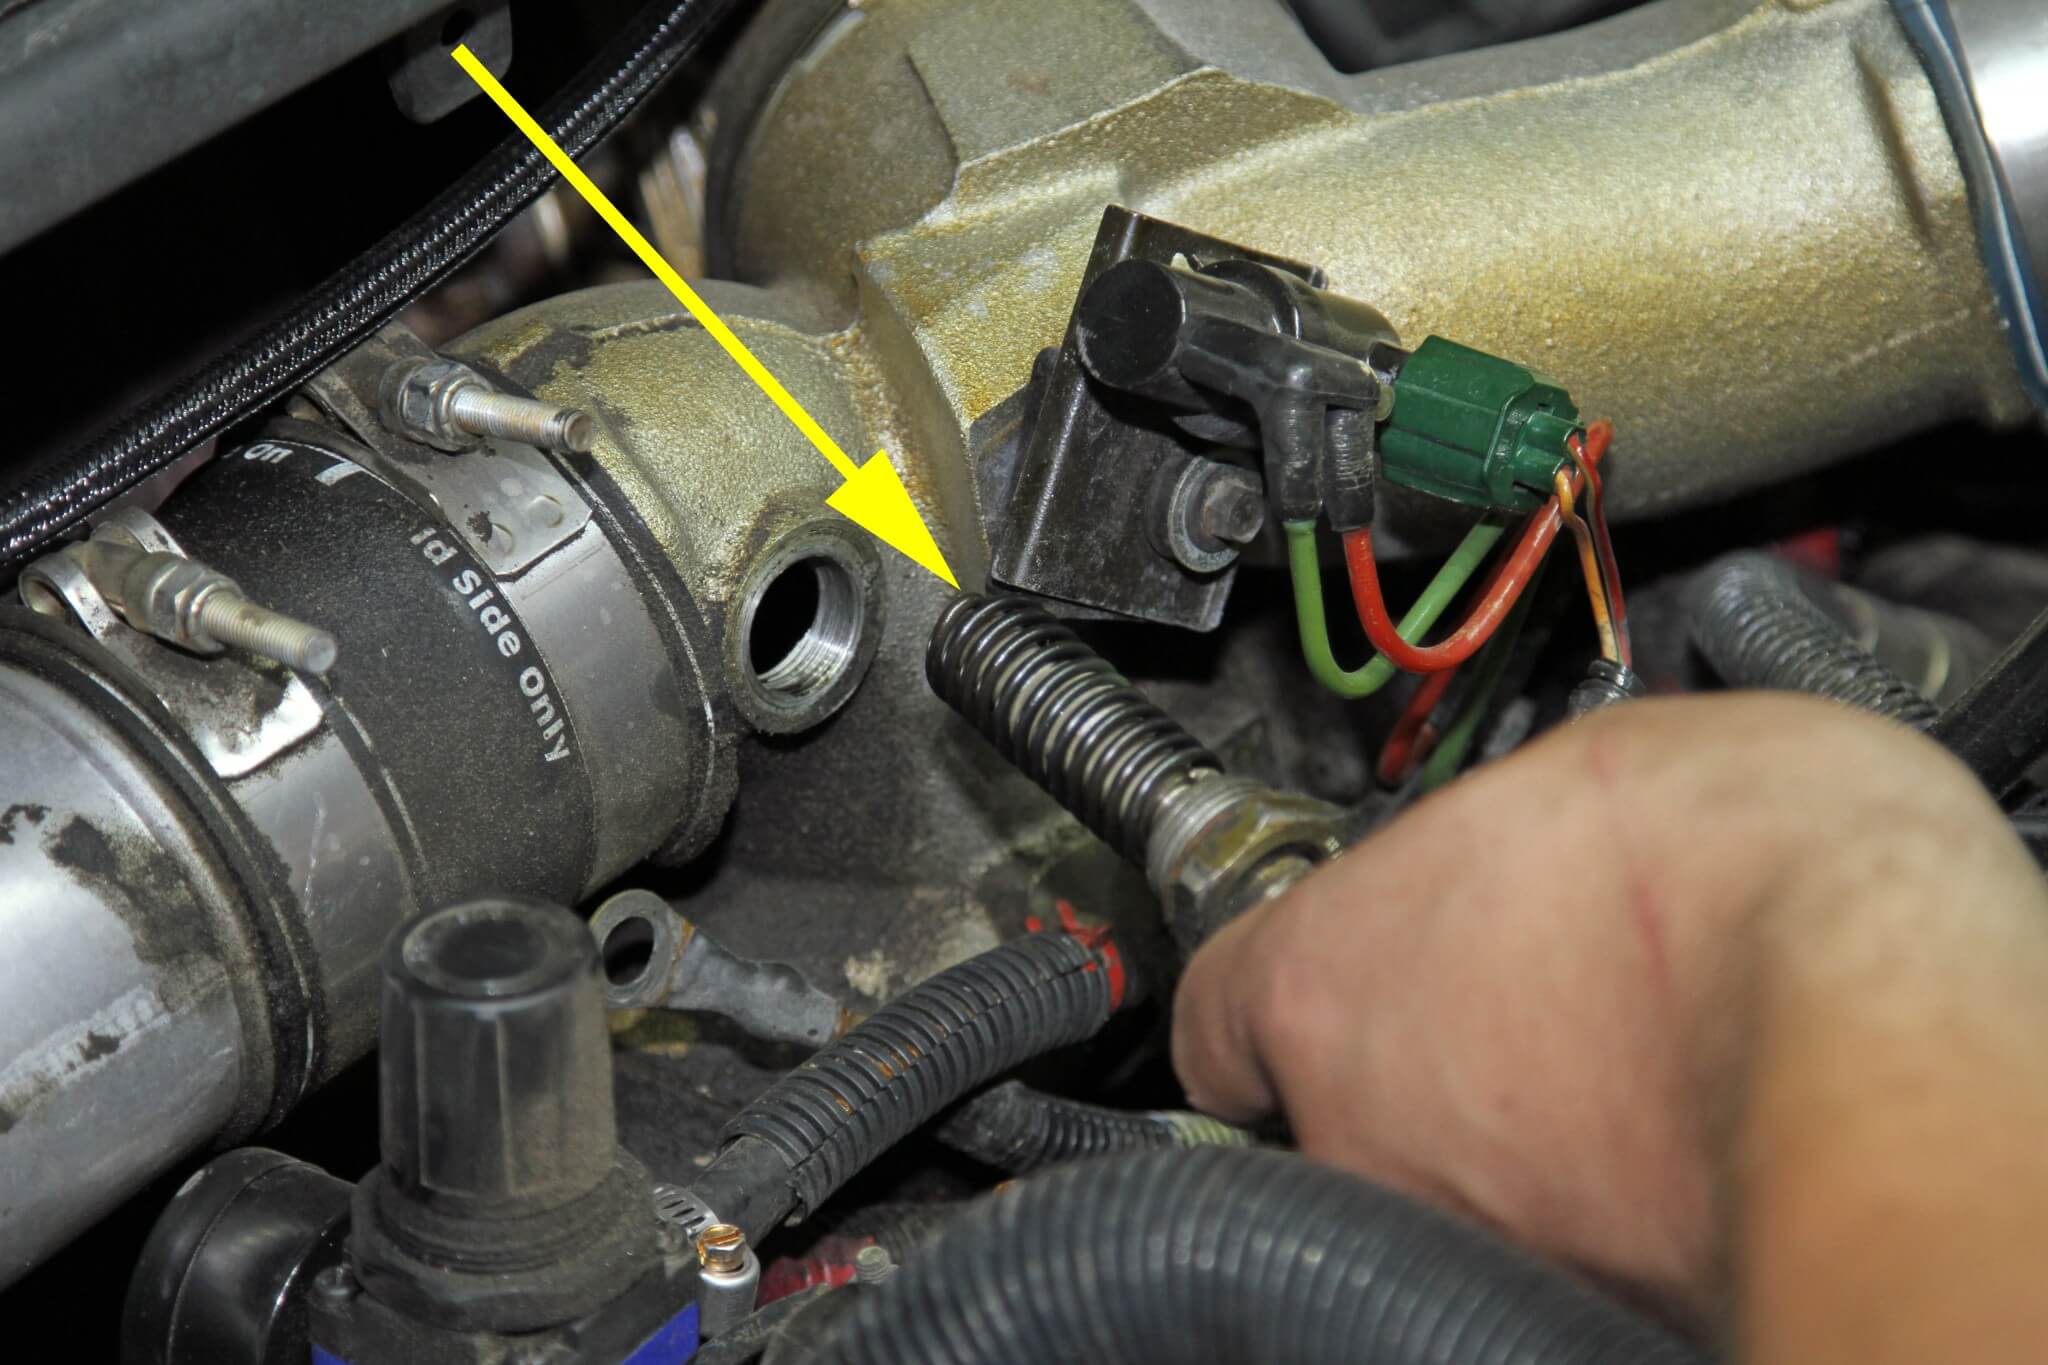 9. The bulky and unnecessary intake heater is removed from the intake and the Driven Diesel plug is installed in its place (see arrows). The plug features a threaded input to install the boost tube port.